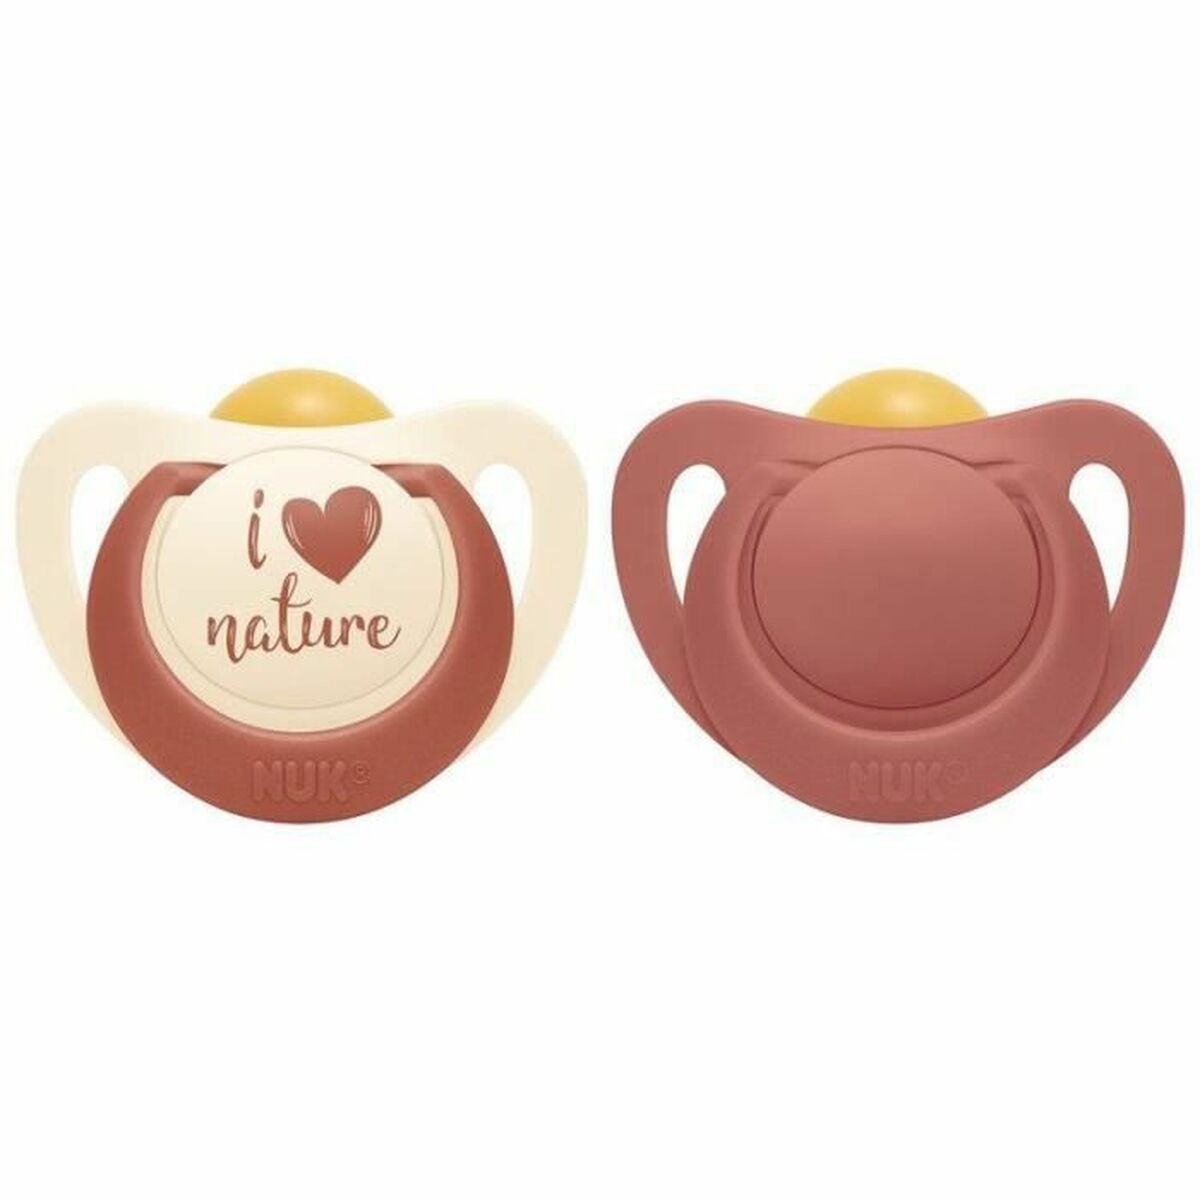 Pacifier Nuk Nature 2 Units (Refurbished A)